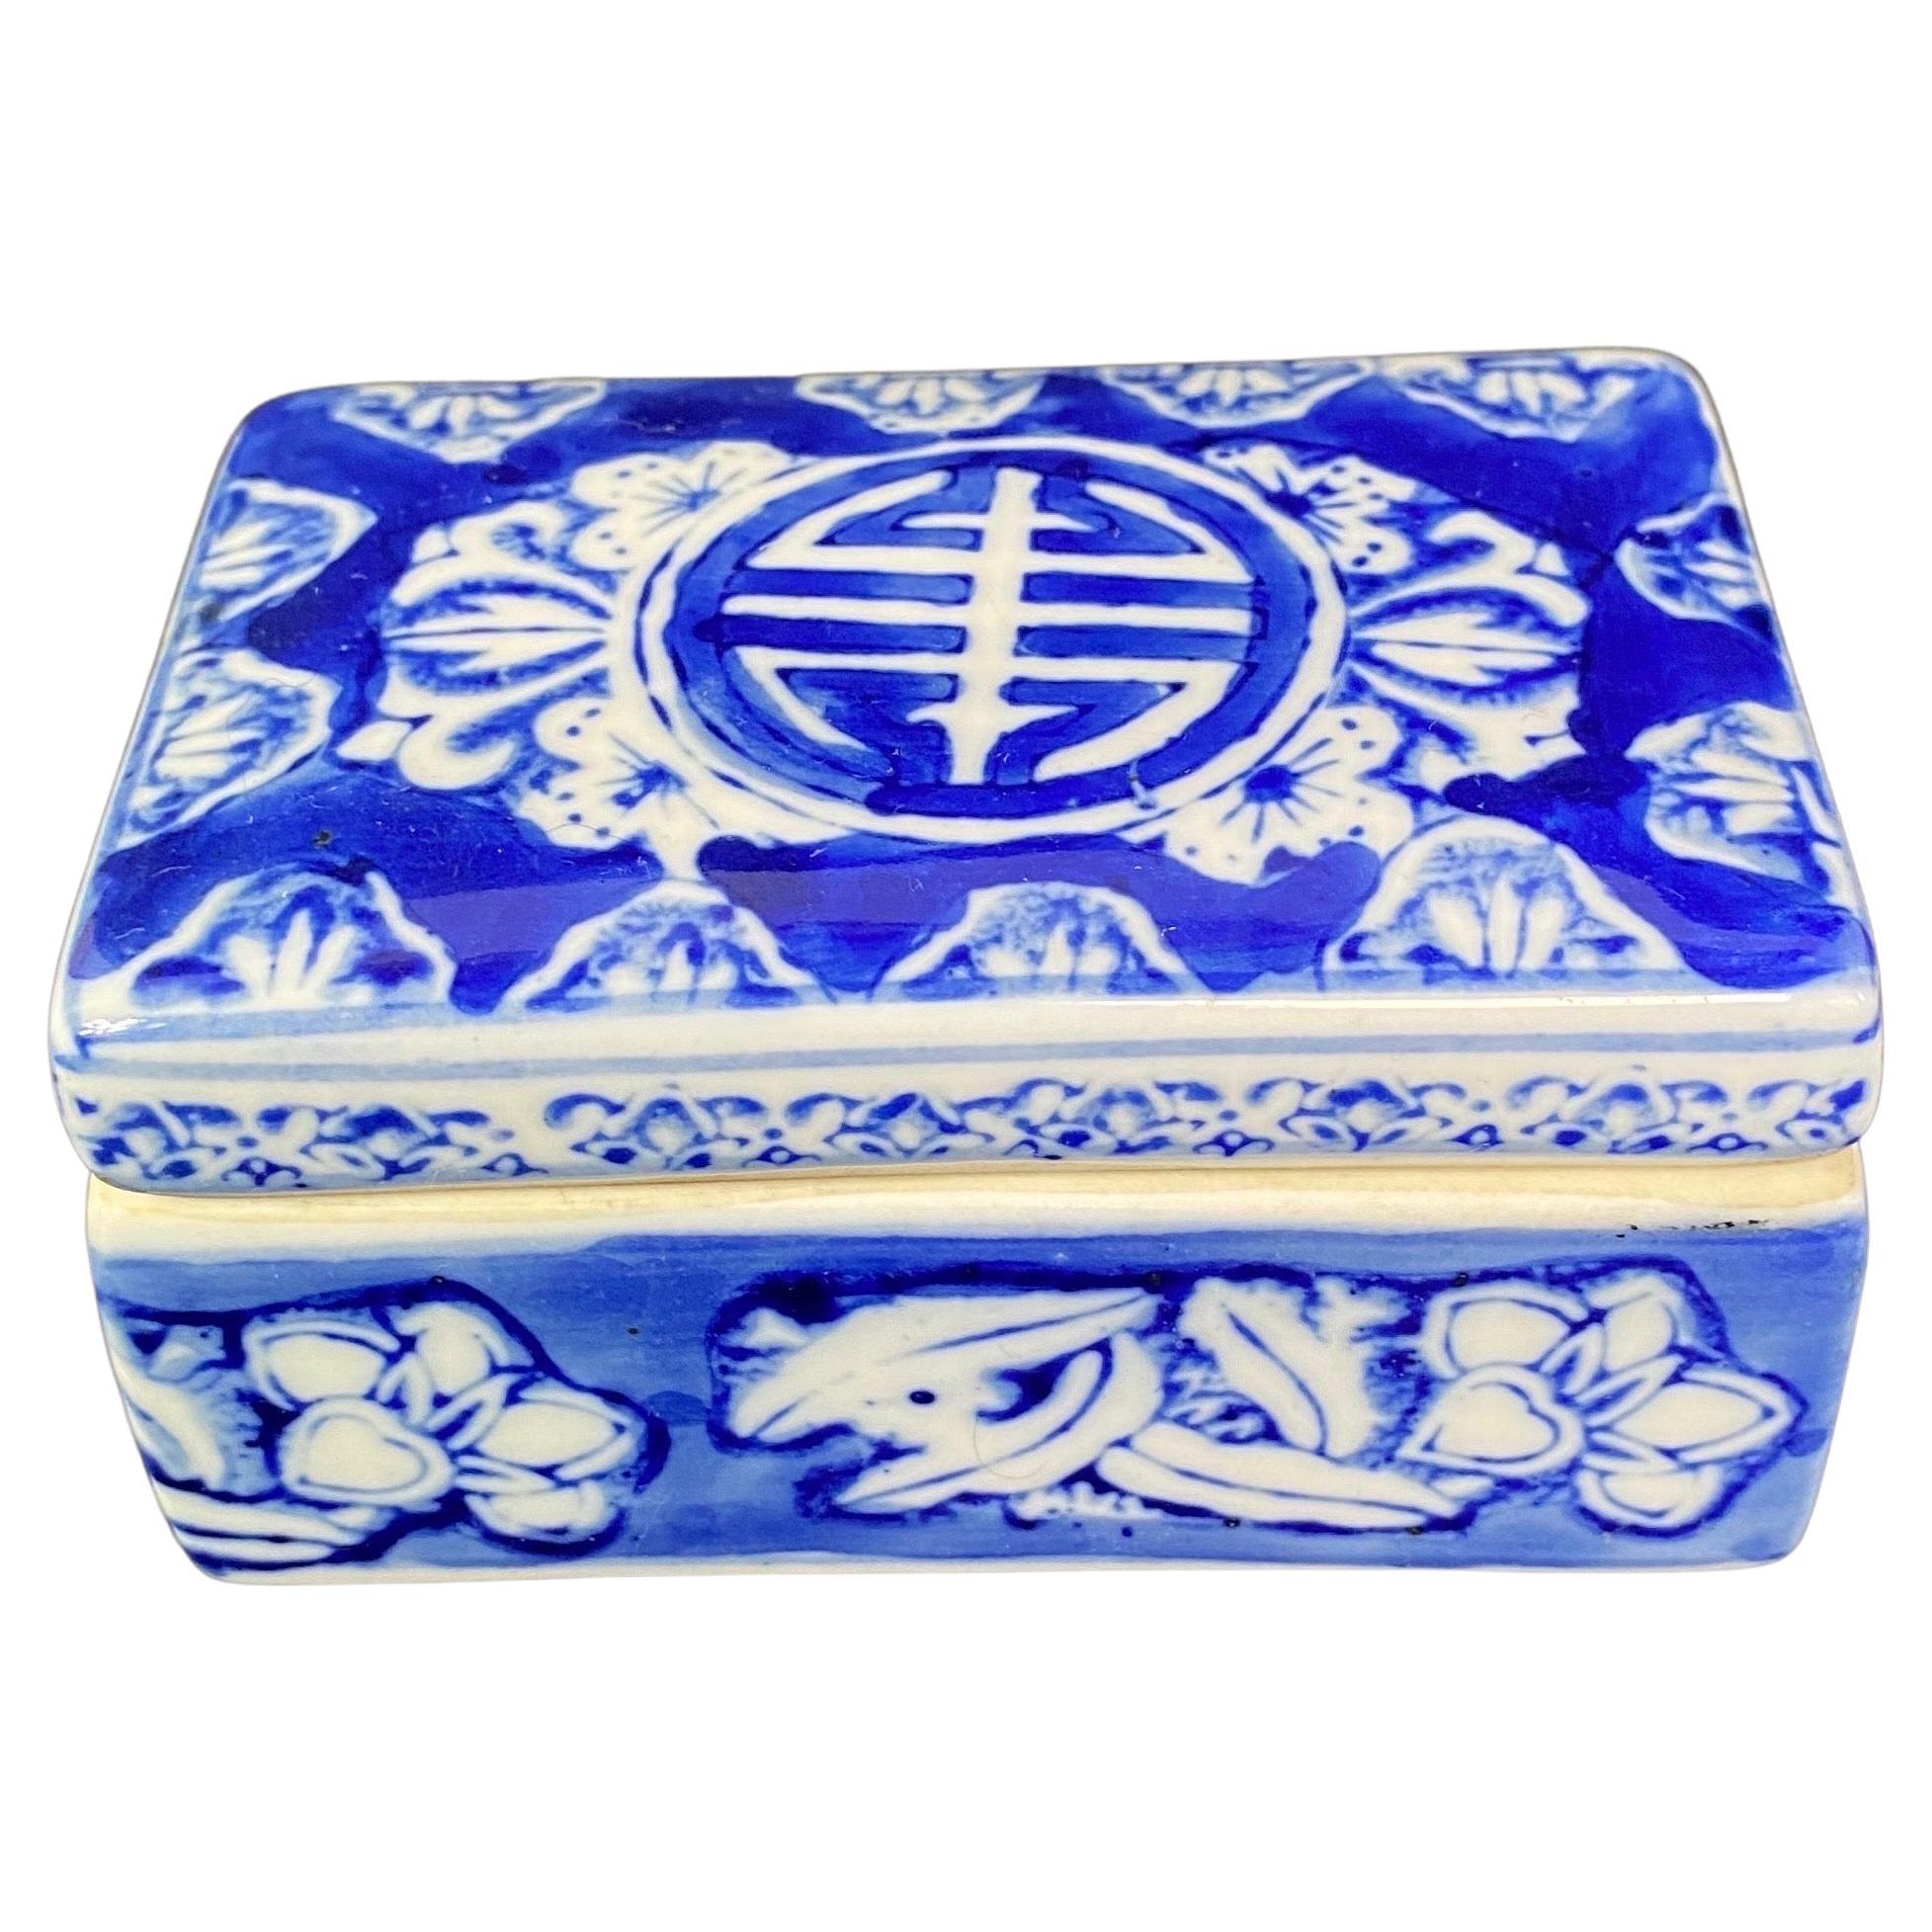 Blue and White Porcelain Ink Writing Jewerly Box - China 1900 Asian art XXth For Sale